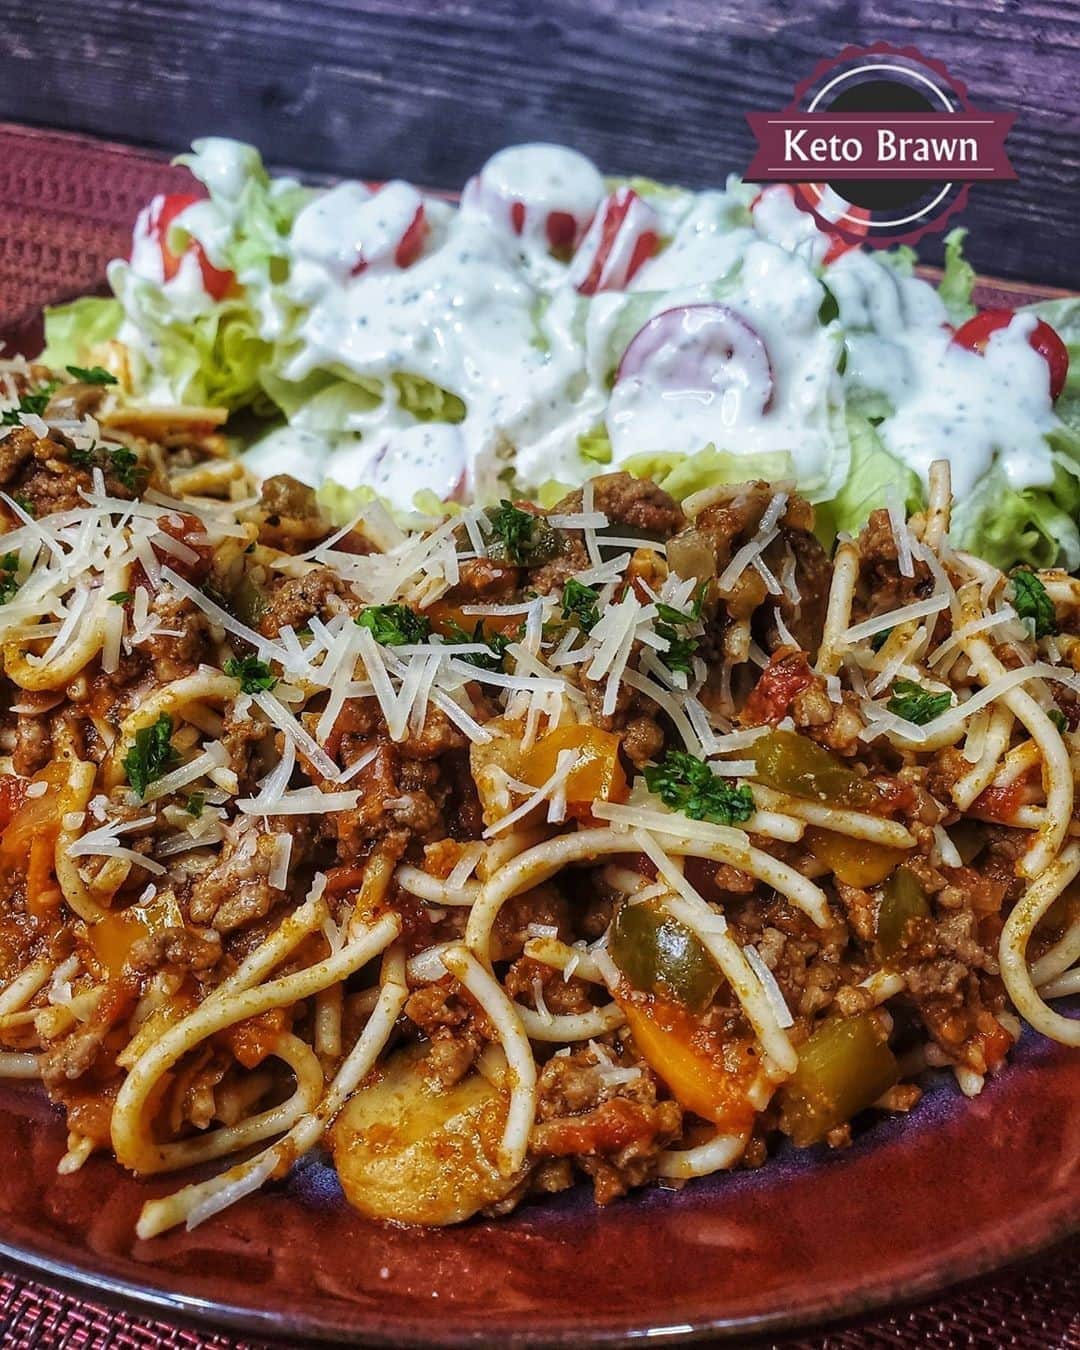 Flavorgod Seasoningsさんのインスタグラム写真 - (Flavorgod SeasoningsInstagram)「Flavor God Seasoned Keto Spaghetti!! By Customer: @ketobrawn you guys rock!! They used FlavorGod Italian Zest and Garlic Lovers seasonings⁠ -⁠ KETO friendly flavors available here ⬇️⁠ Click link in the bio -> @flavorgod⁠ www.flavorgod.com⁠ -⁠ 1 pkg @greatlowcarb spaghetti noodles ⠀⁠ 1lb hamburger⠀⁠ 1lb ground Italian sausage ⠀⁠ 1/2 ea... green and orange bell pepper chopped⠀⁠ 1 med onion chopped⠀⁠ 1 pkg fresh shrooms⠀⁠ 1 heaping tbsp of minced garlic ⠀⁠ 1 can of diced tomatoes with the liquid⠀⁠ ⠀⁠ Use these to your taste:⠀⁠ @flavorgod Garlic Lovers and Italian Zest seasonings⠀⁠ 1 tsp ea. Dried basil and oregano ⠀⁠ Salt and pepper⠀⁠ We used 2 tbsps of the Italian Zest ⠀⁠ And 1 1/2 tbsp of Garlic Lovers⠀⁠ ⠀⁠ 1) Add a quarter size of olive oil and add the minced garlic, just for a couple minutes in the pan you choose to make your sauce in. We used a deep skillet.⠀⁠ 2) Chop the veggies. ⠀⁠ 3) After the meat is browned, throw into a colander to drain. Add your veggies to that pan and cook for about 4 minutes, mixing a few times. ⠀⁠ 4) Add the meat back to the veggies, mix , add the Raos sauce, diced tomatoes and seasonings , mix together. Let simmer for about an hour uncovered on low. Turn off heat and let sit til the pasta is done.⠀⁠ 5) Start boiling the pasta water. When it's rolling add the spaghetti noodles and boil for 20 minutes. ⠀⁠ Plate it up and enjoy Brawnies!!! We used grated parmesan and fresh minced basil on top 😋😋 Happy weekend y'all ❤❤❤⠀⁠ -⁠ Flavor God Seasonings are:⁠ ✅ZERO CALORIES PER SERVING⁠ ✅MADE FRESH⁠ ✅MADE LOCALLY IN US⁠ ✅FREE GIFTS AT CHECKOUT⁠ ✅GLUTEN FREE⁠ ✅#PALEO & #KETO FRIENDLY⁠ -⁠ #food #foodie #flavorgod #seasonings #glutenfree #mealprep #seasonings #breakfast #lunch #dinner #yummy #delicious #foodporn」10月4日 10時01分 - flavorgod